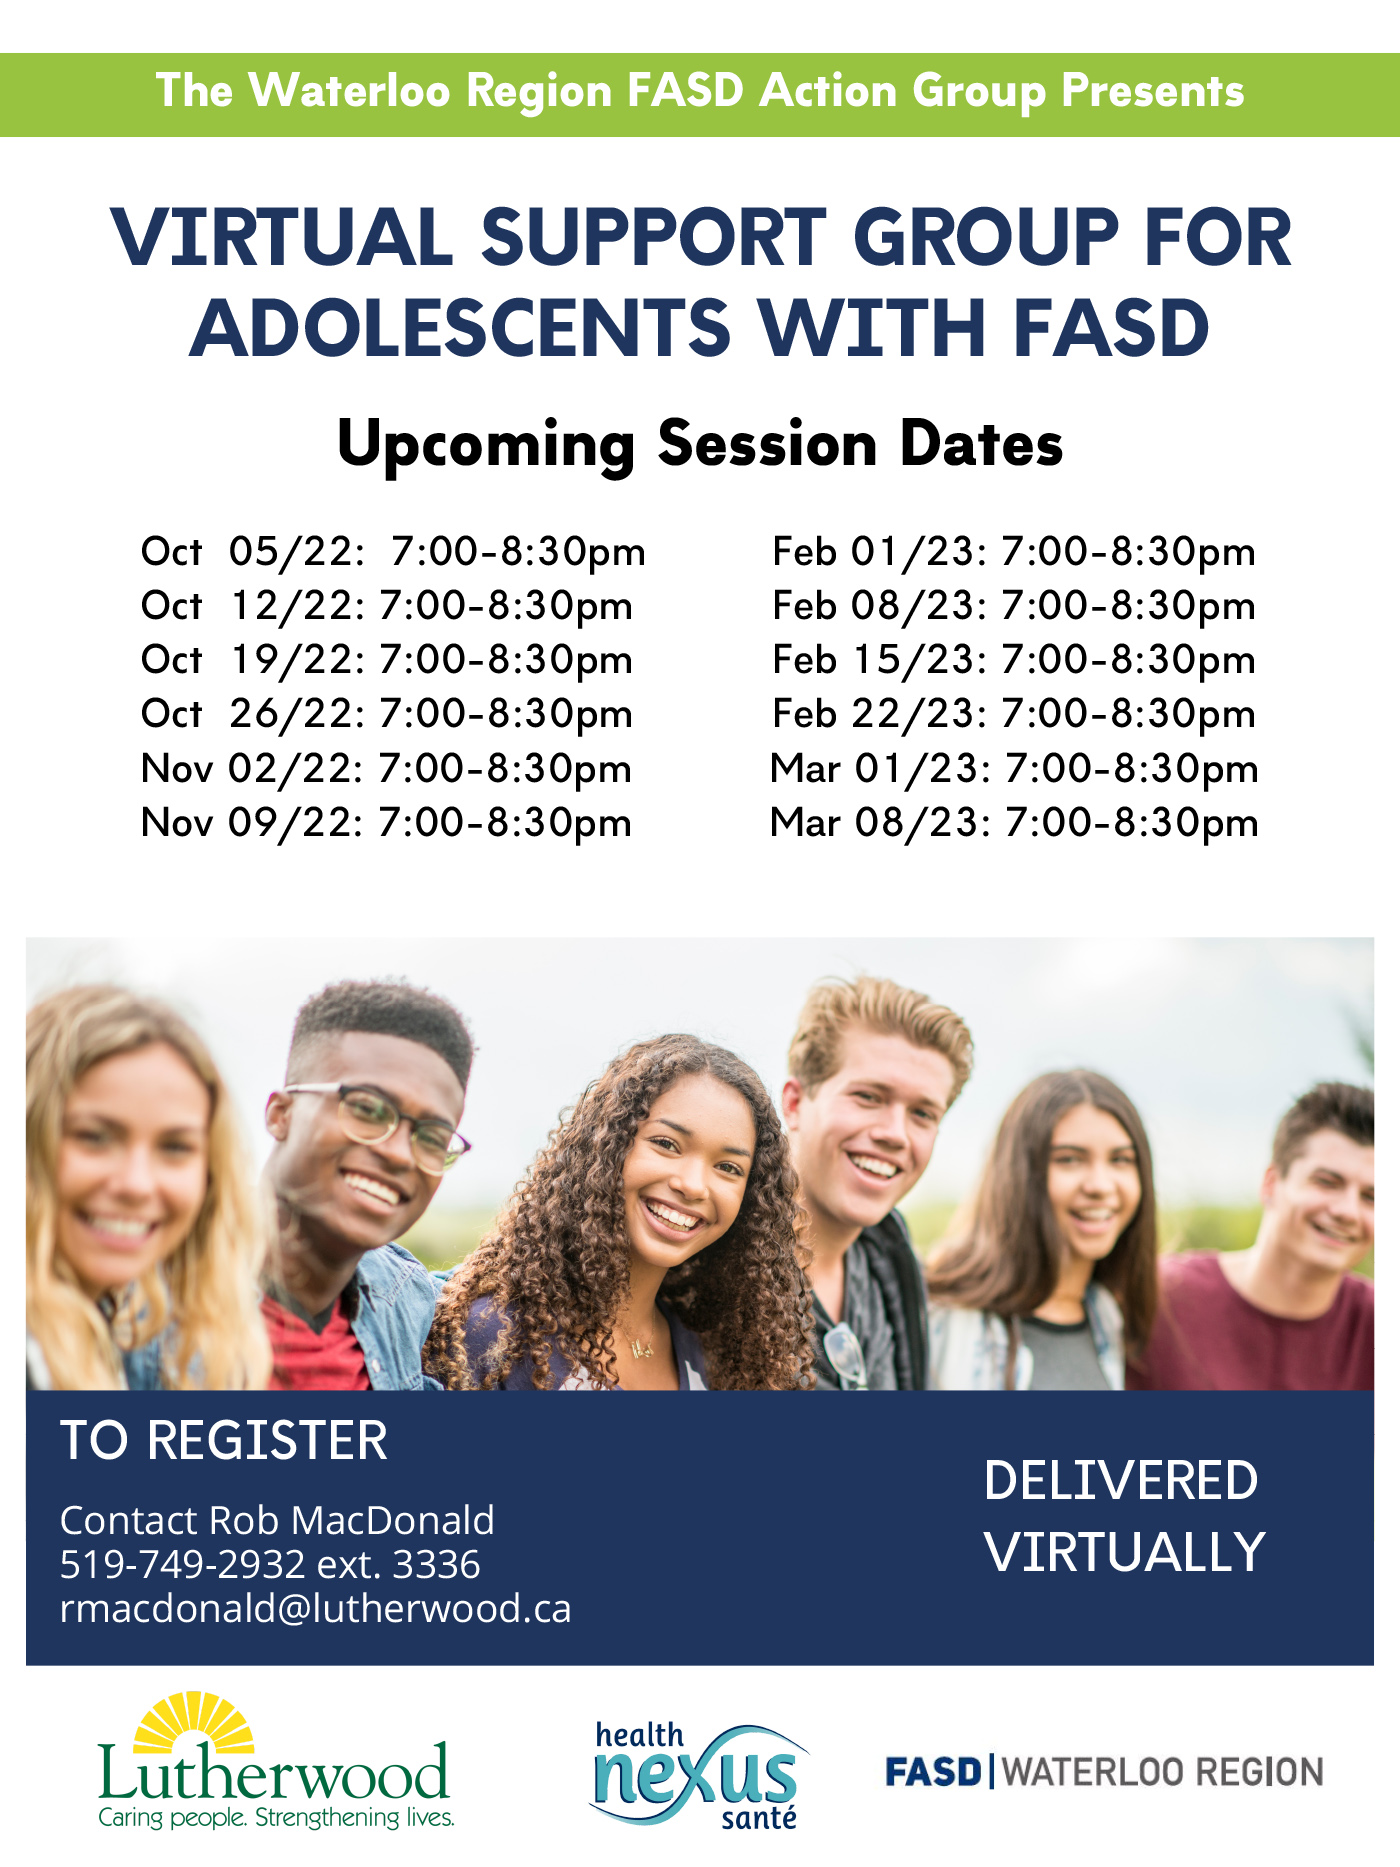 Virtual Support Group for Adolescents with FASD